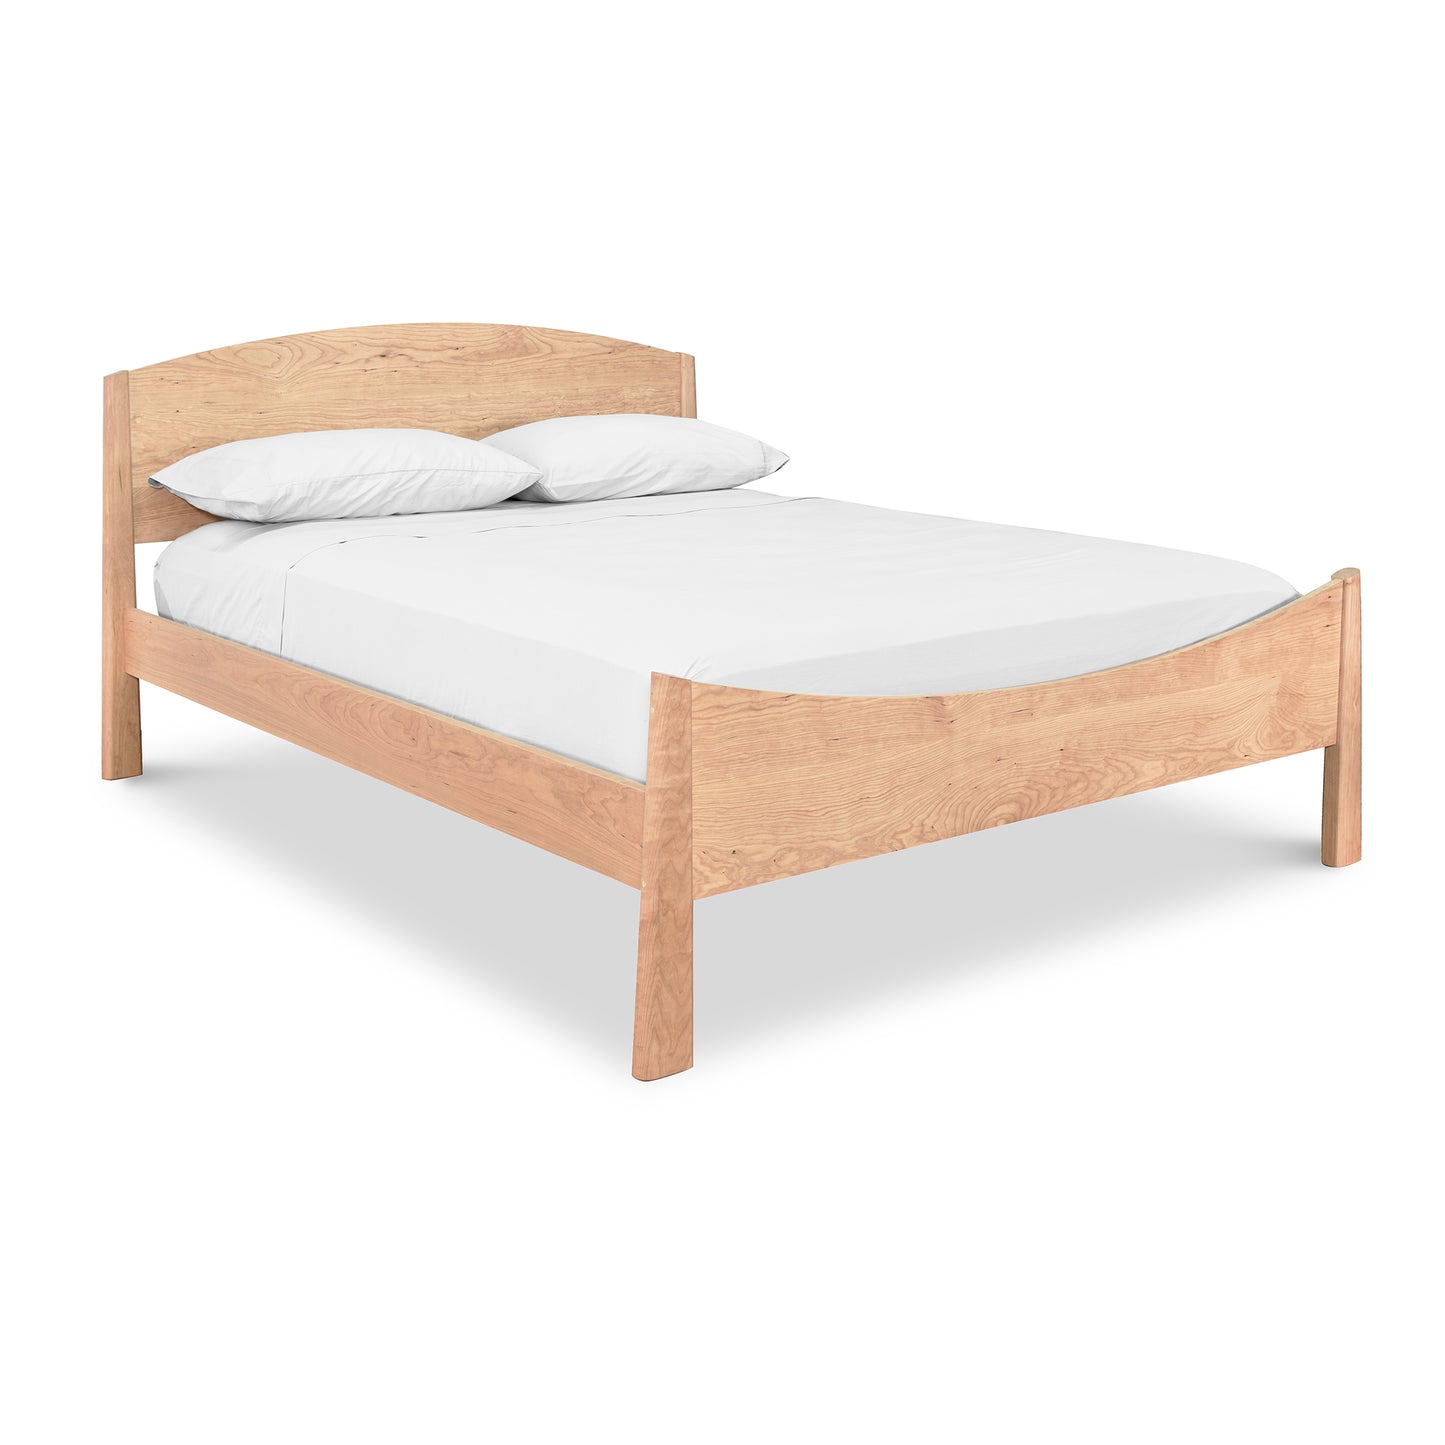 A sustainably harvested handmade Cherry Moon Bed by Maple Corner Woodworks with white sheets on it.